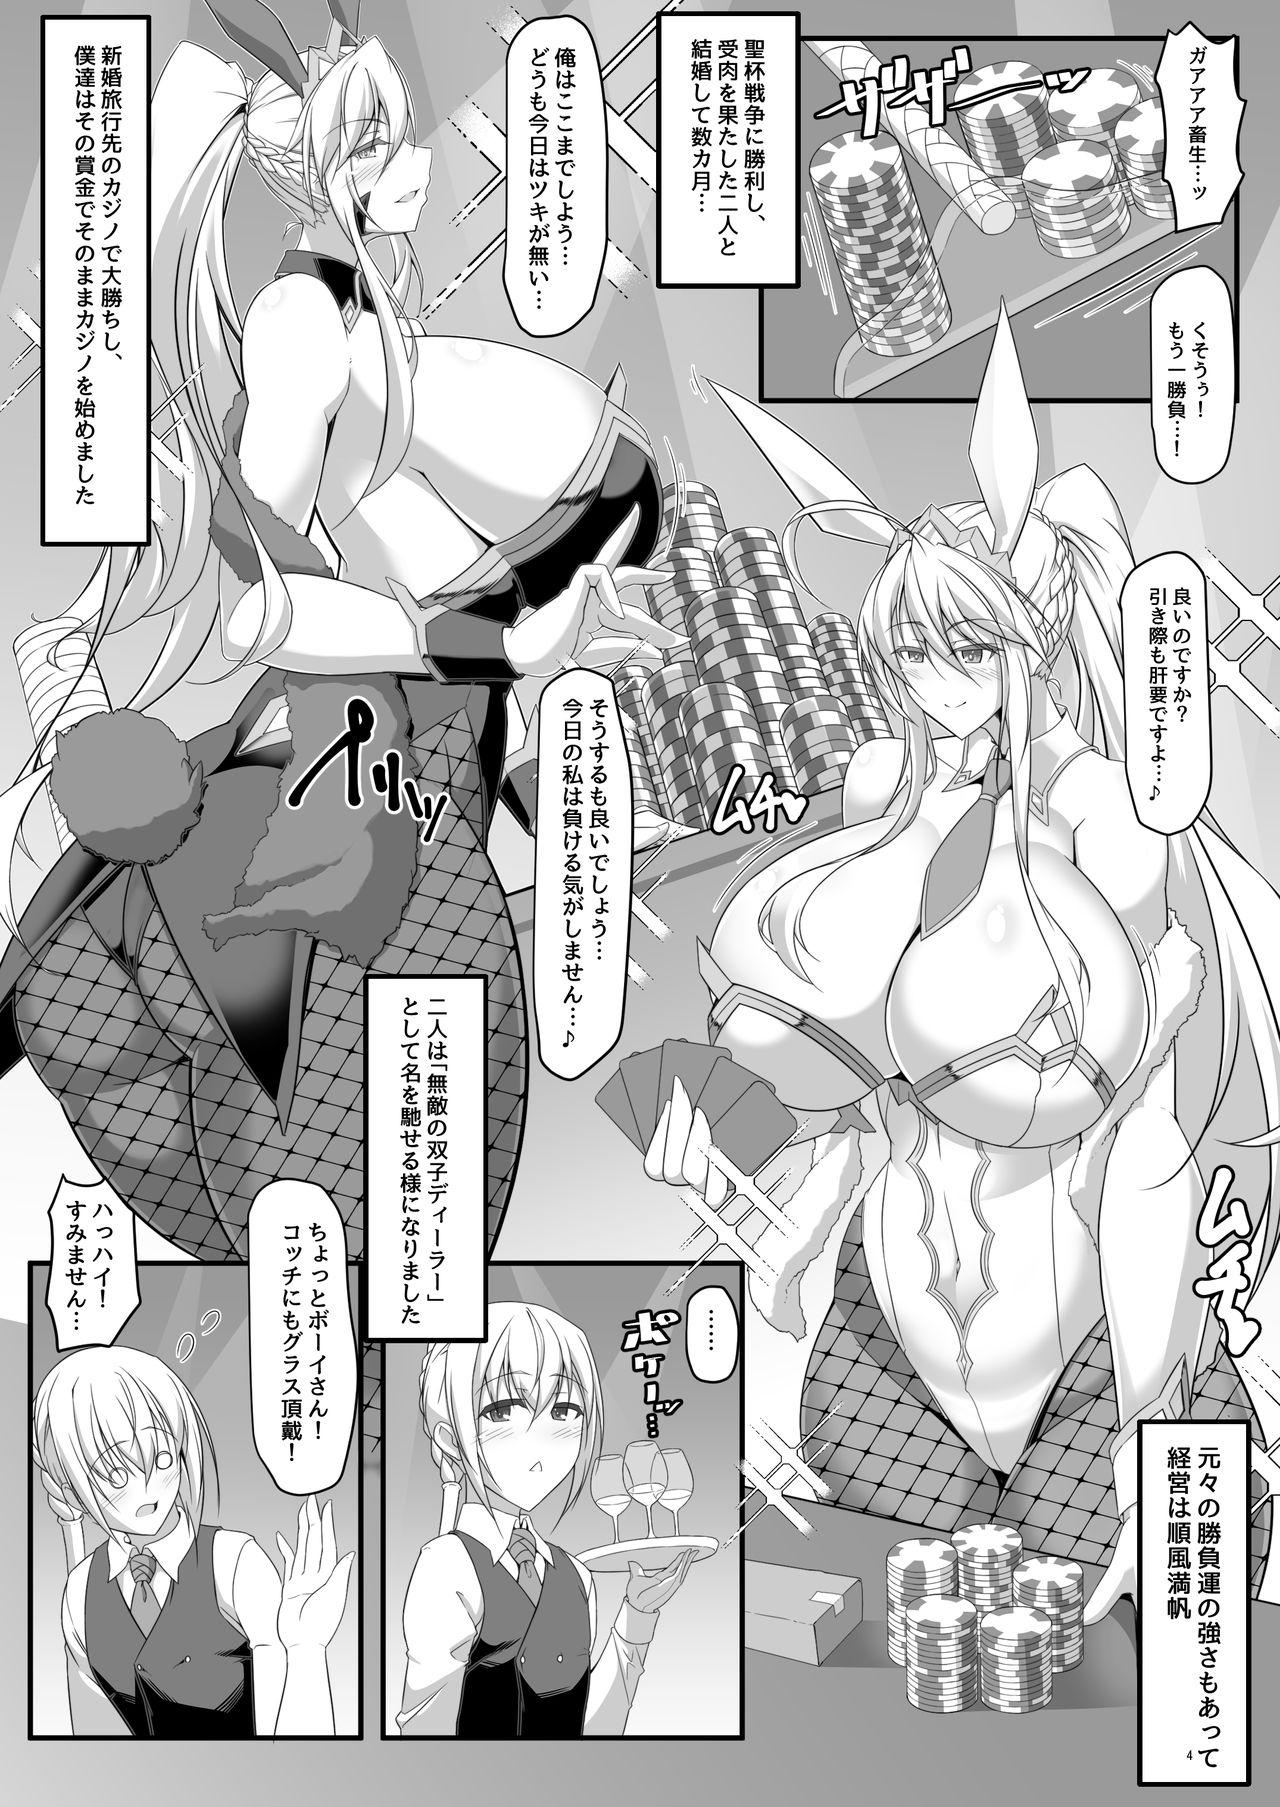 Swallowing Souou to Maguau II - Fate grand order Periscope - Page 4